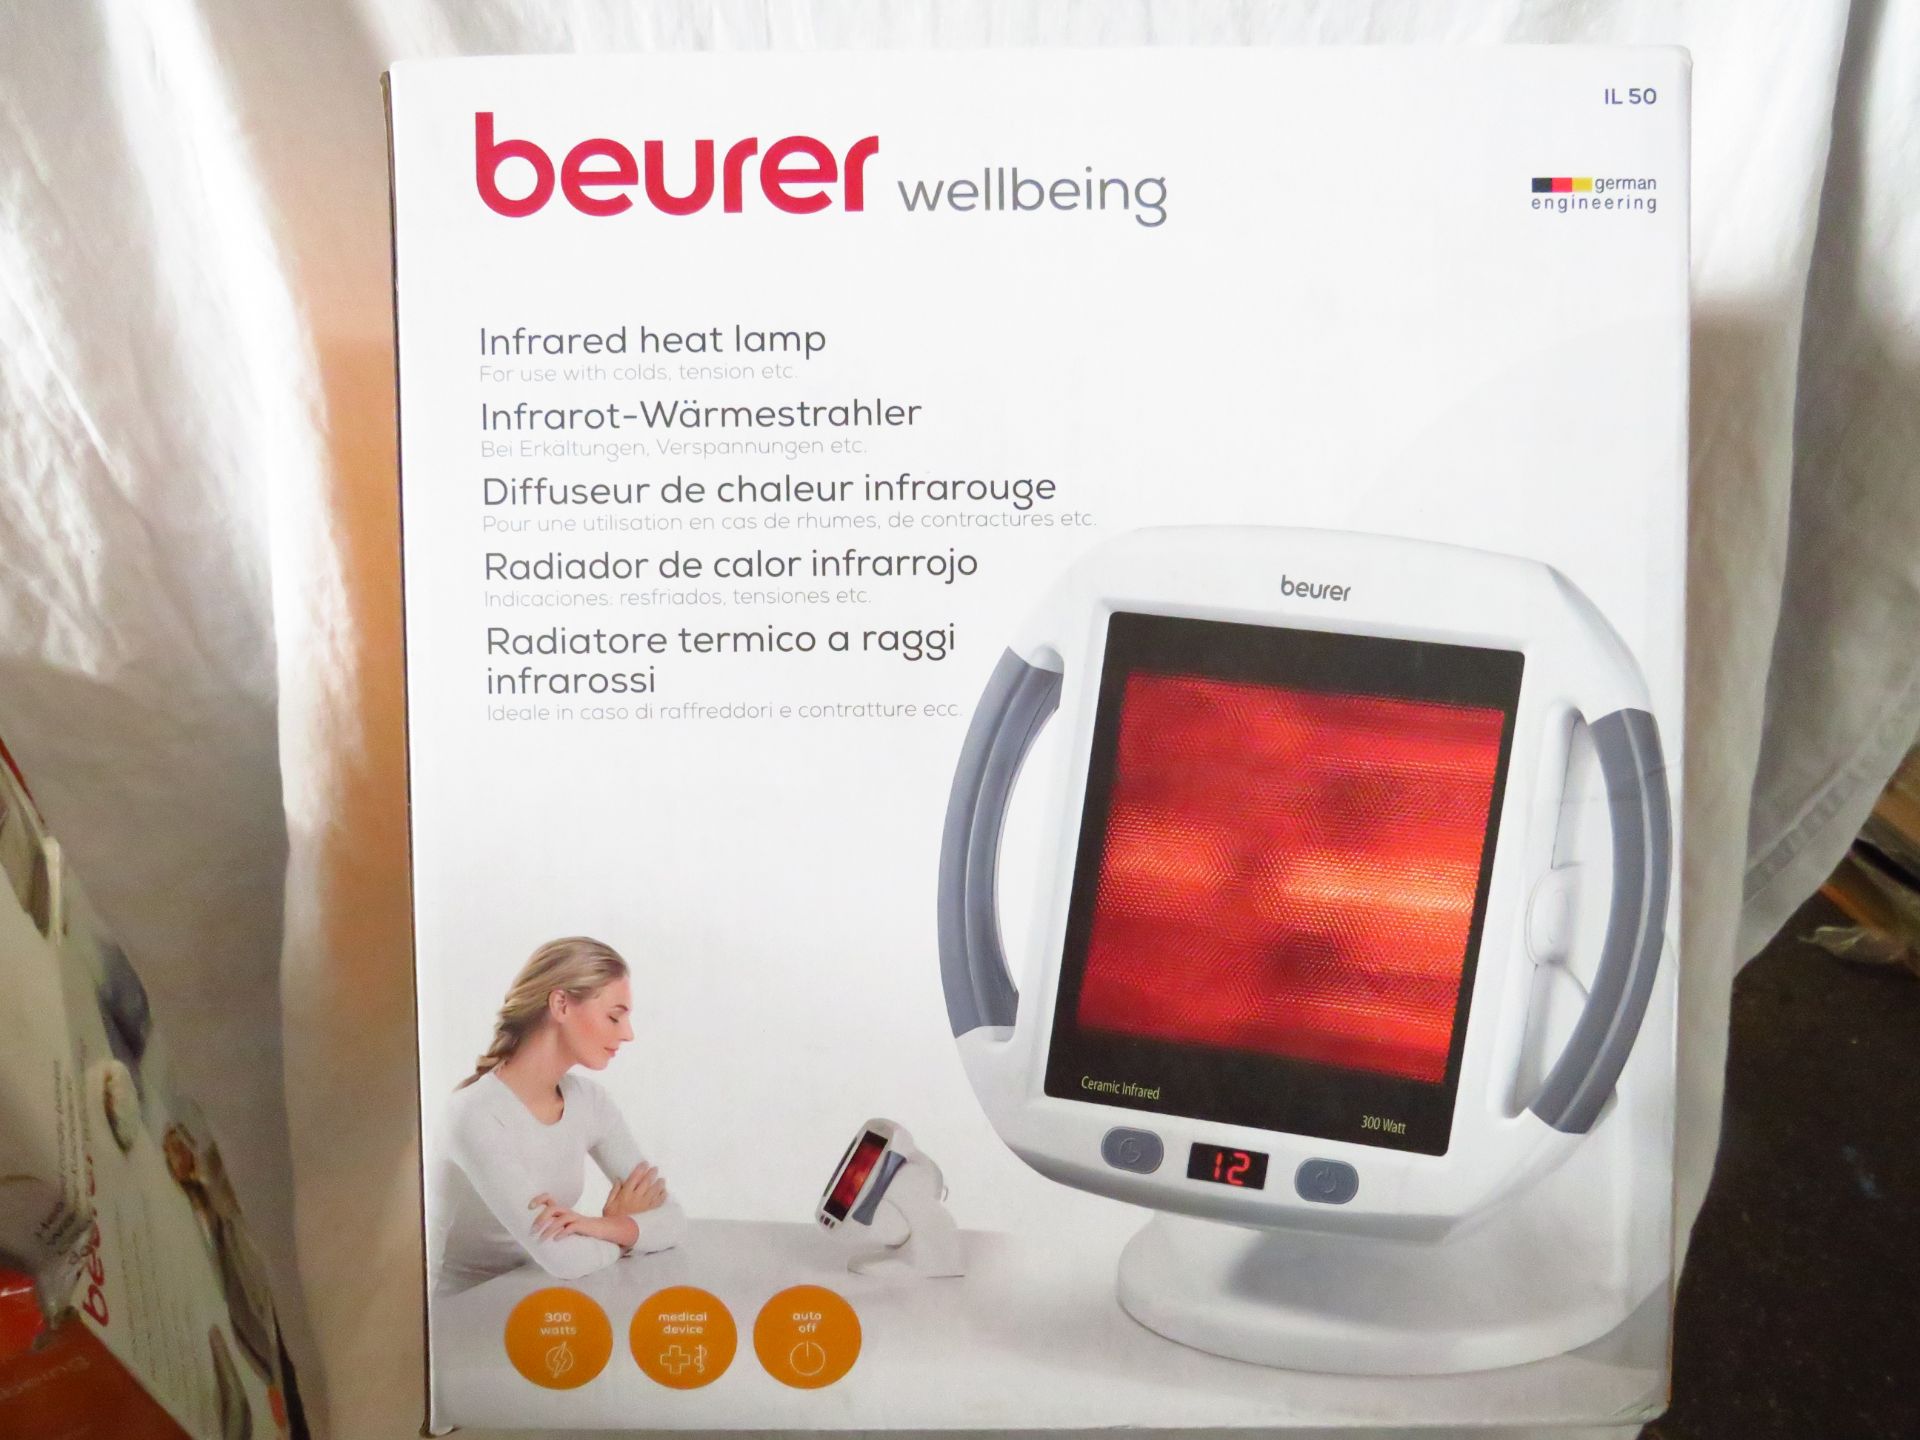 Beurer IL50 infrared lamp grade B but unchecked by us, boxed